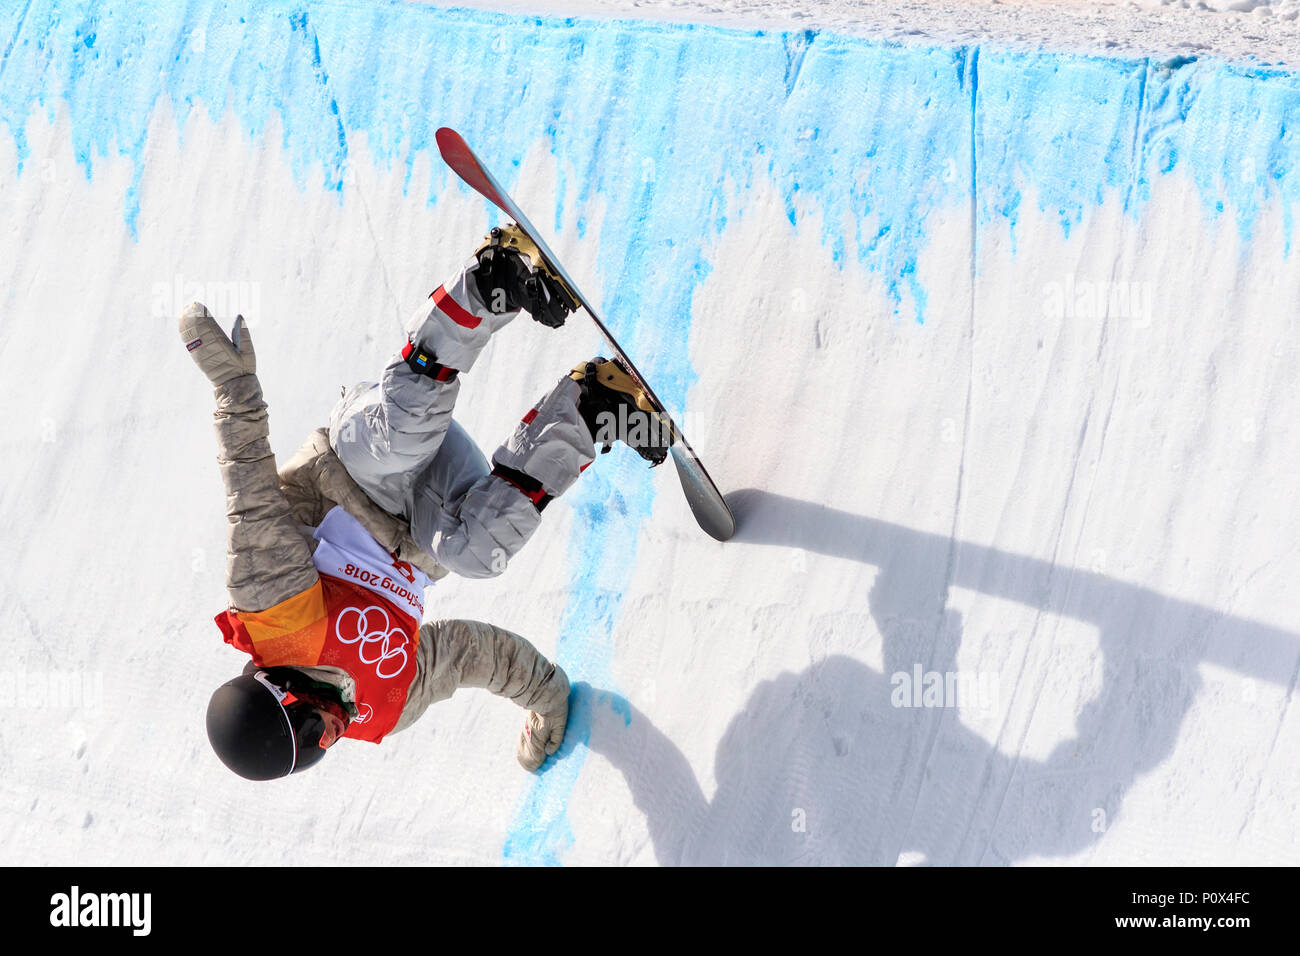 Chase Josey (USA) competing in  the Men's Snowboarding Half Pipe Qualification at the Olympic Winter Games PyeongChang 2018 Stock Photo